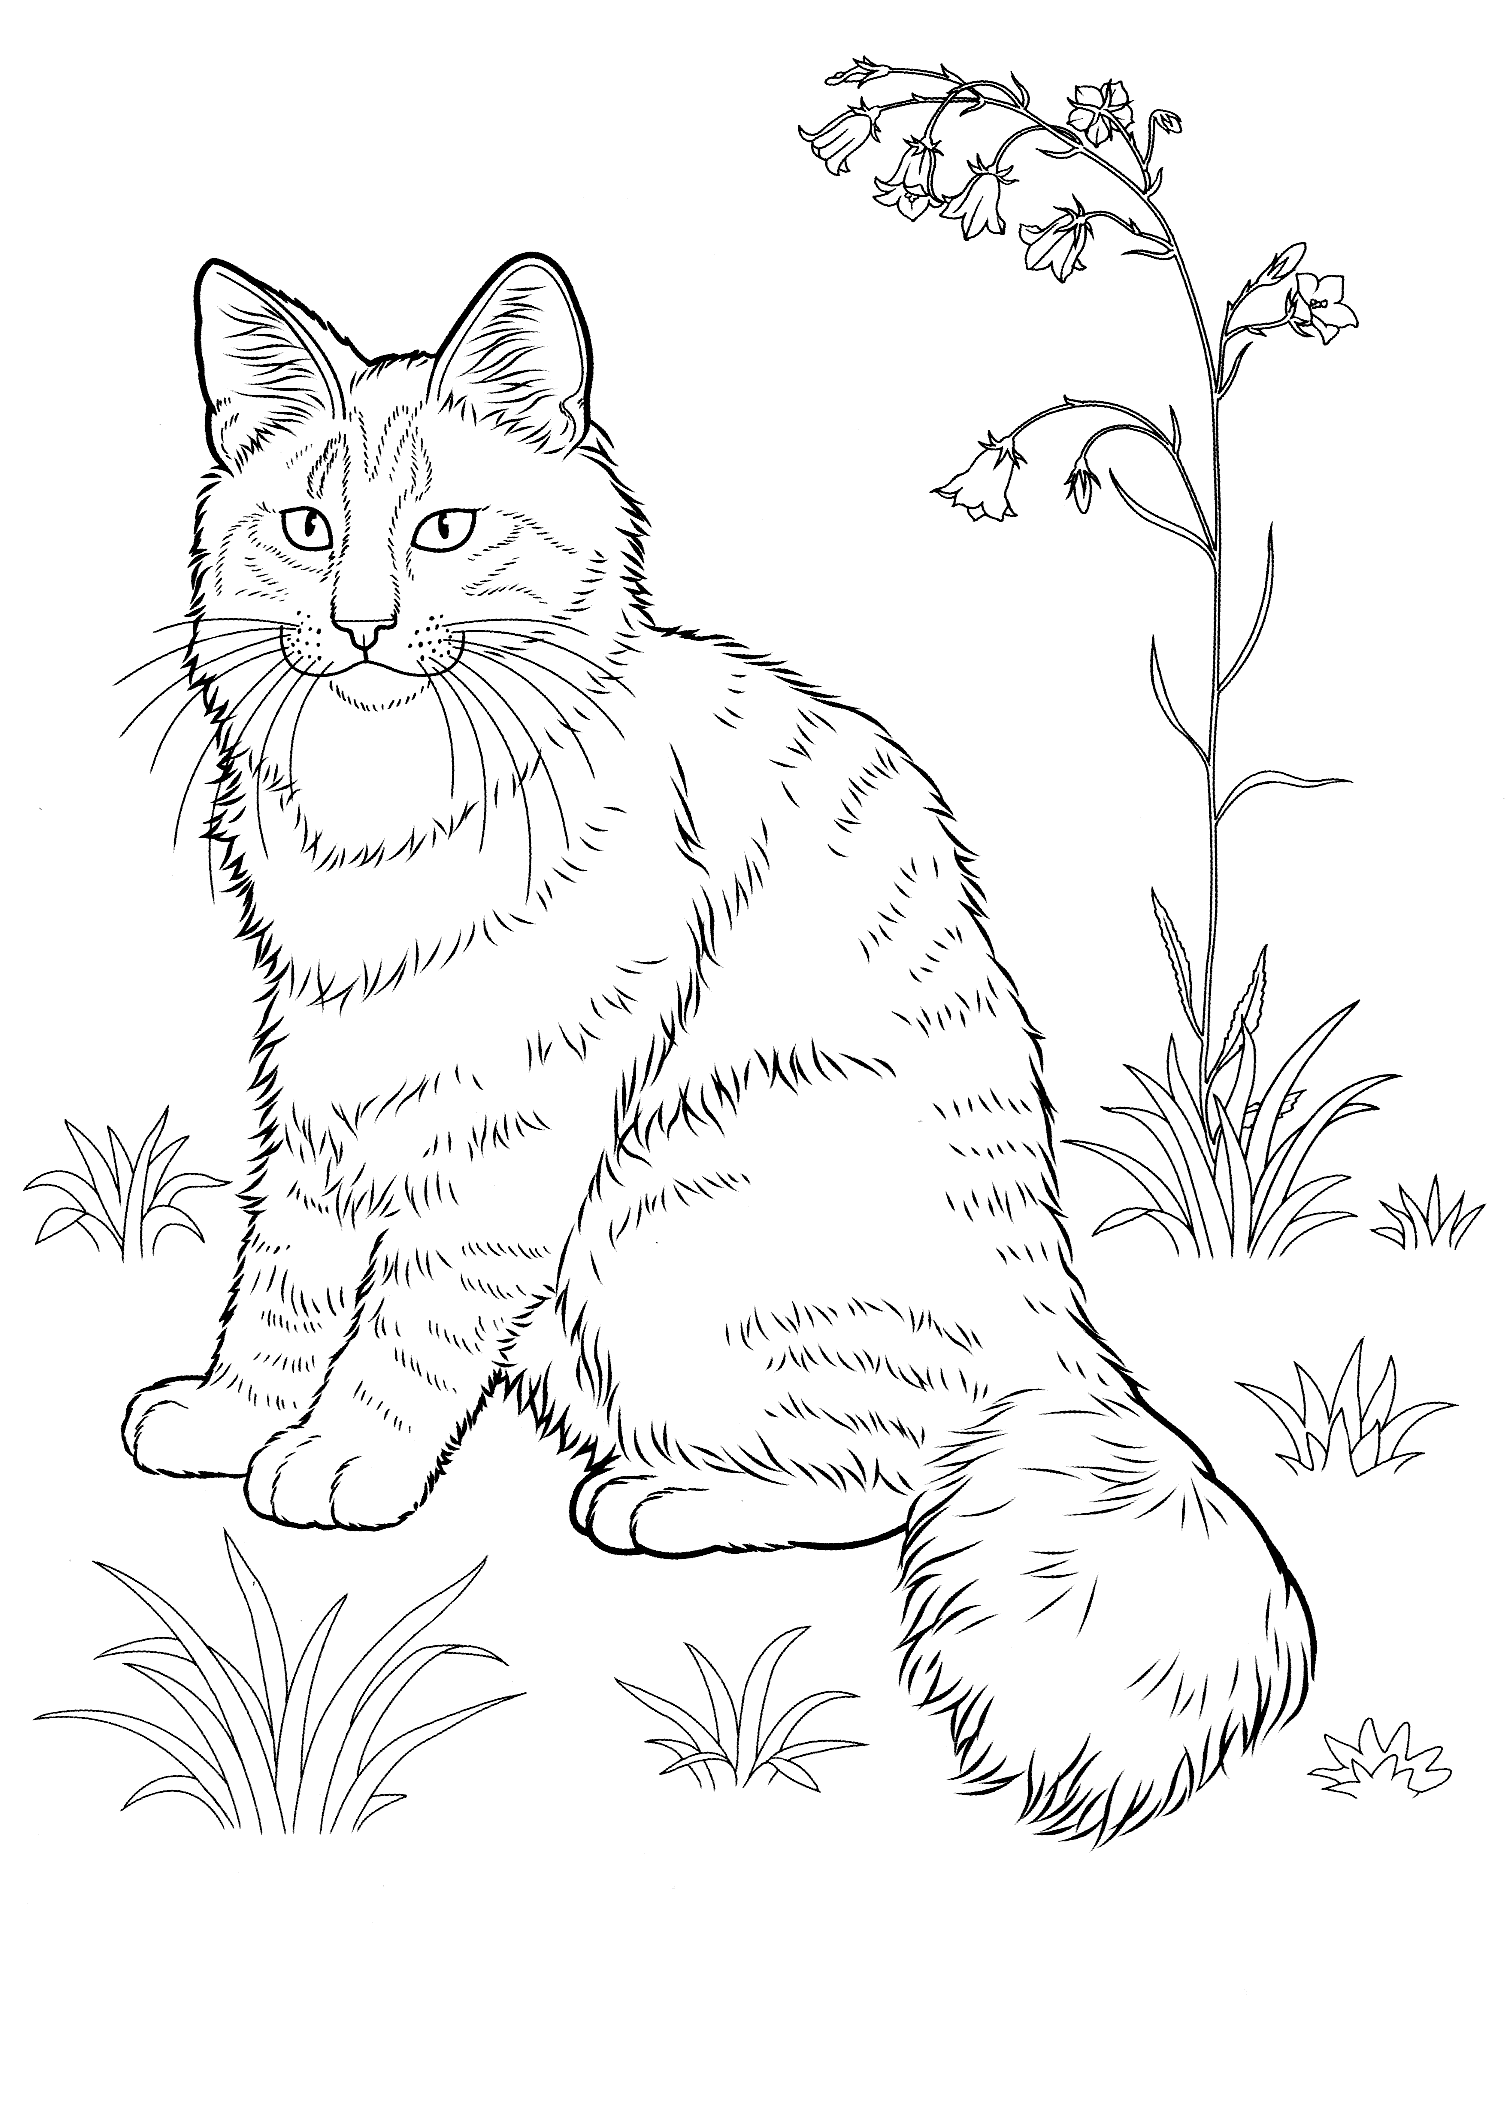 Adult Cat Coloring Pages Striped Cat for Adults Printable 2020 219 Coloring4free